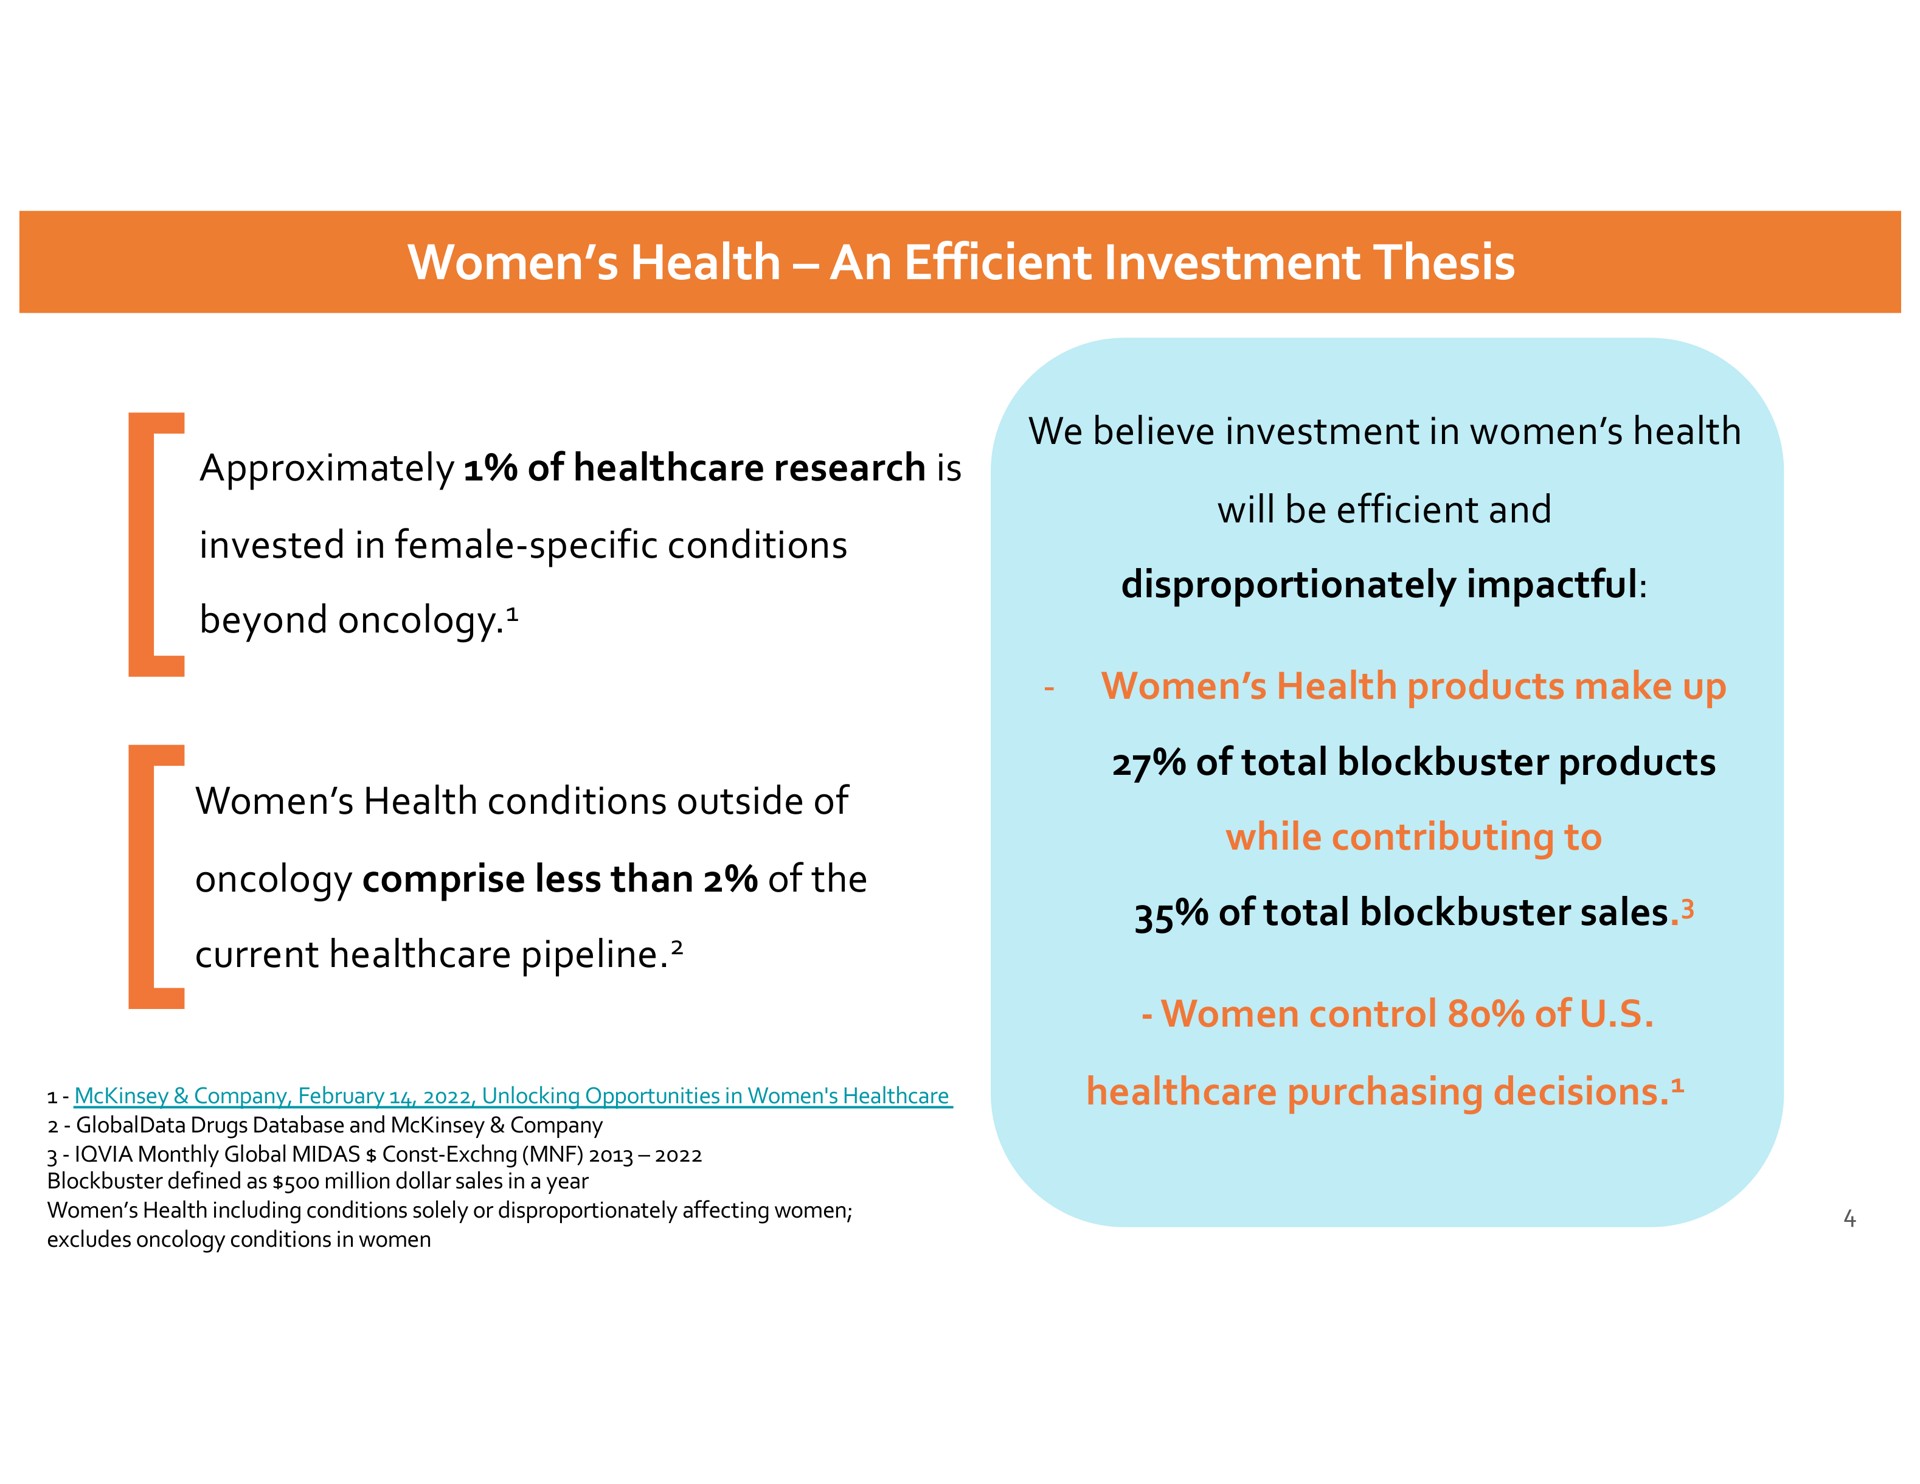 women health is our sole focus women health an efficient investment thesis approximately of research is invested in female specific conditions beyond oncology women health conditions outside of oncology comprise less than of the current pipeline we believe investment in women health will be efficient and disproportionately women health products make up of total blockbuster products while contributing to of total blockbuster sales women control of purchasing decisions a | Dare Bioscience